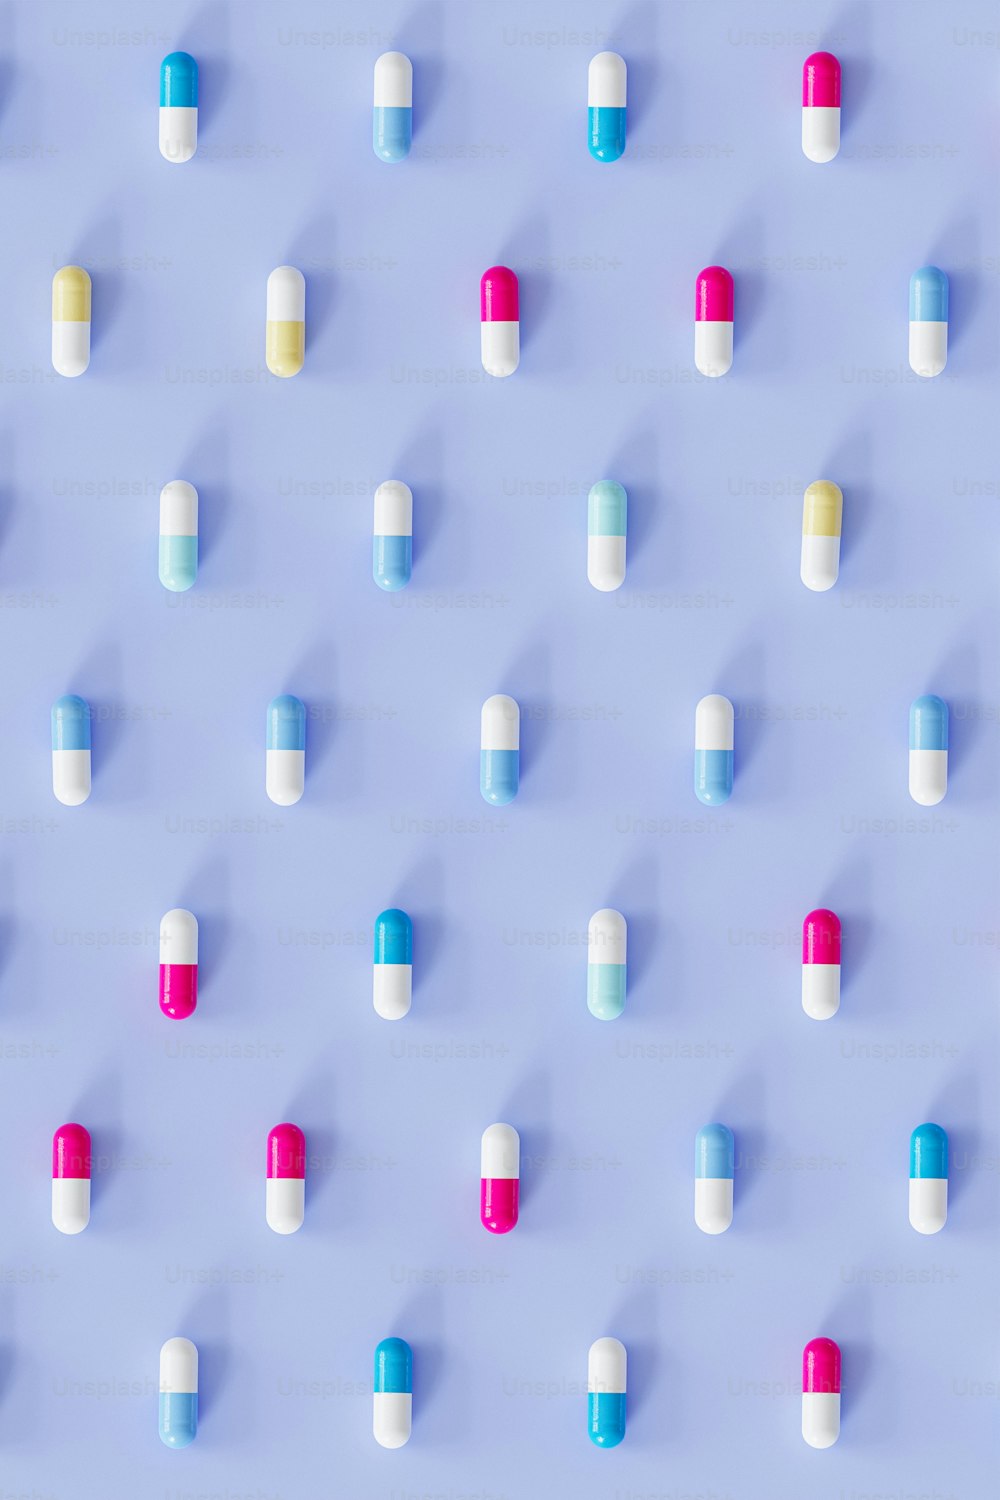 many pills are arranged on a blue surface